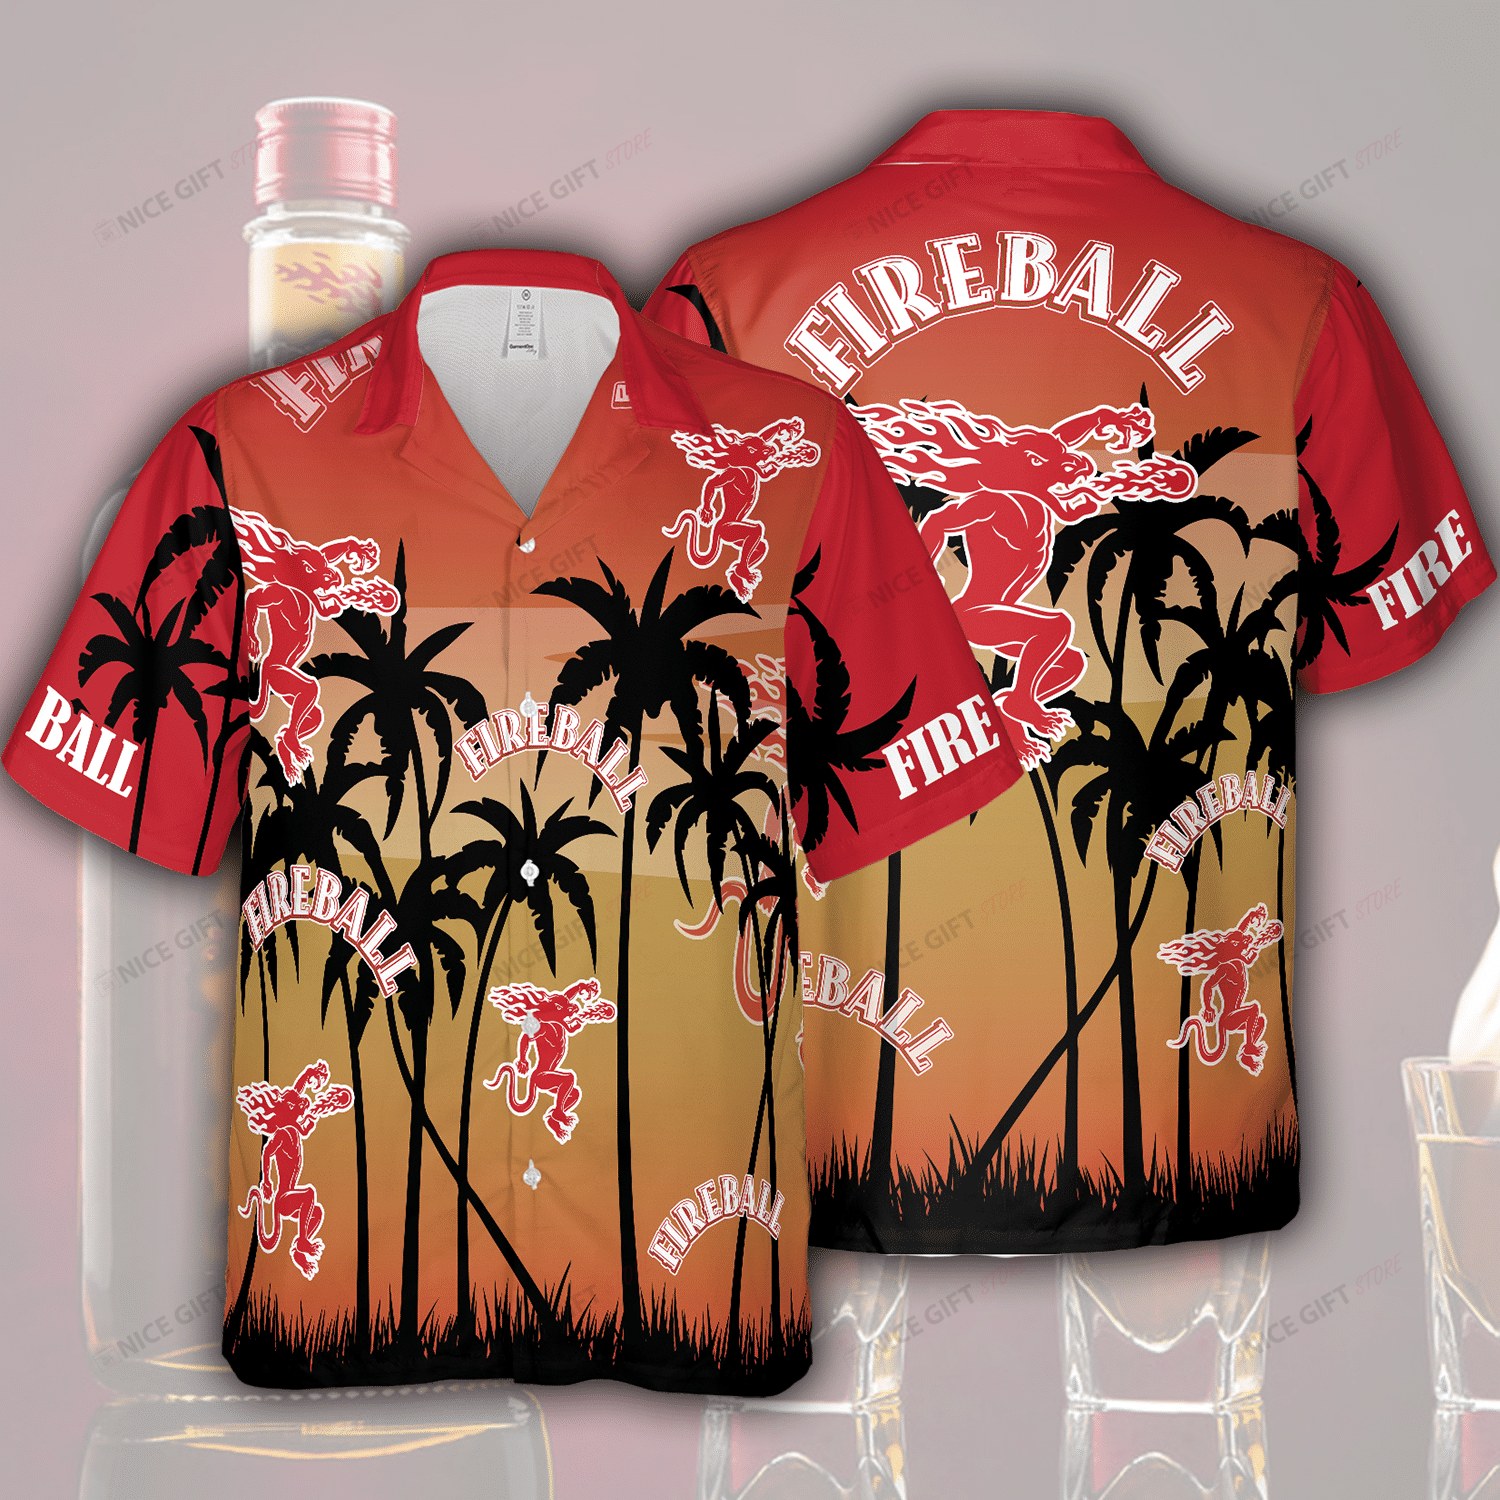 There are several types of Hawaiian shirts available on the market 133